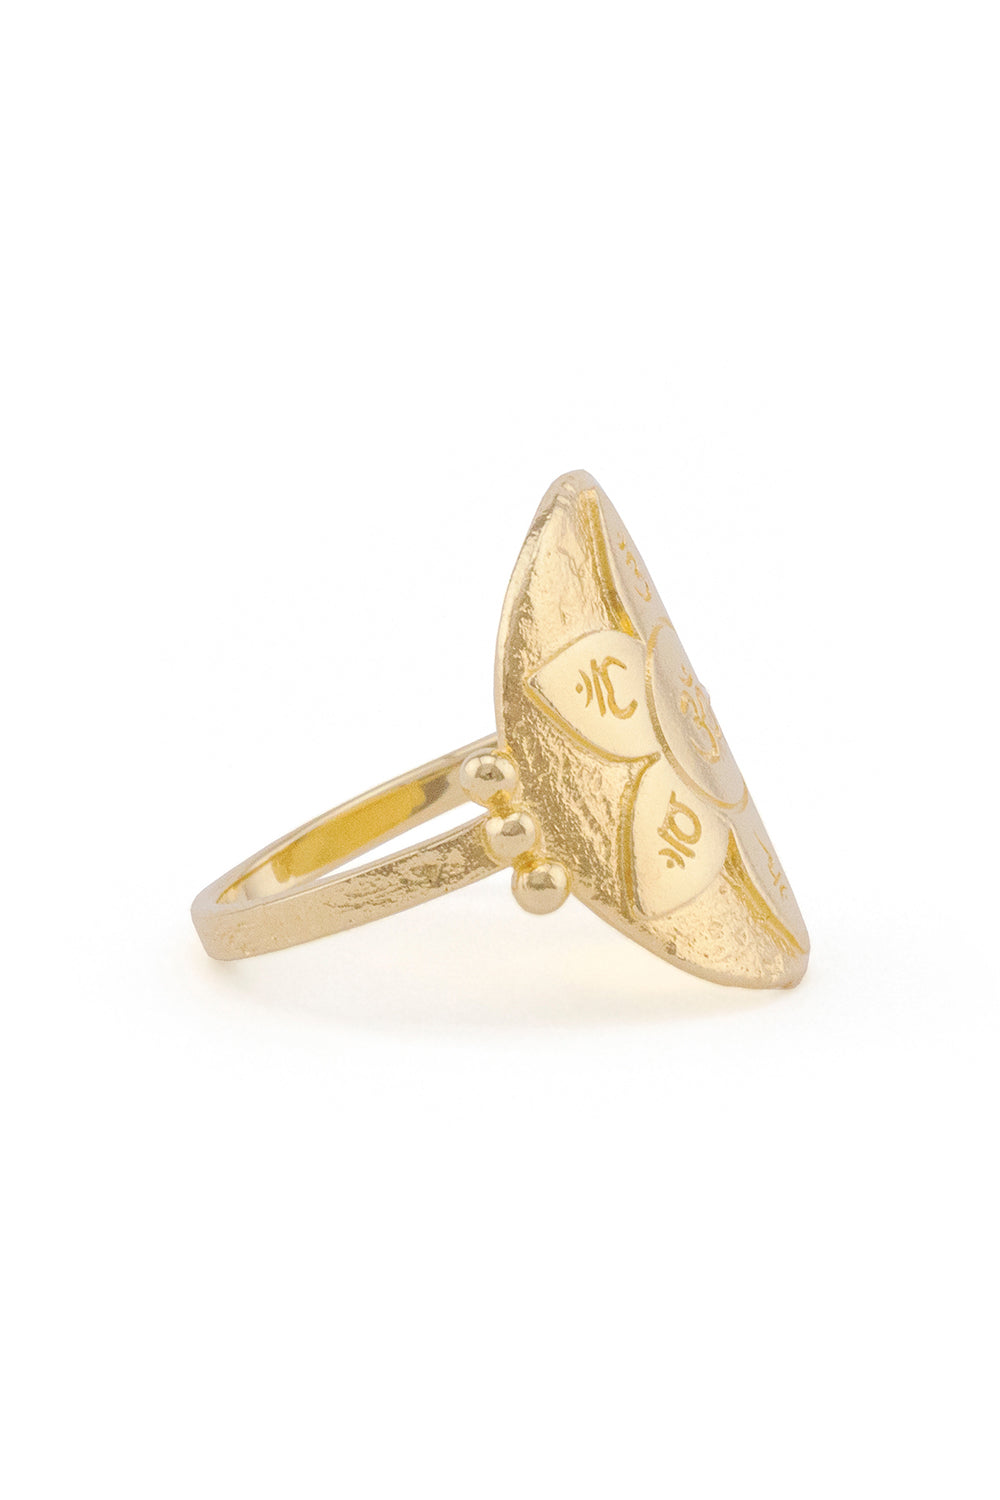 BY CHARLOTTE HARMONY RING GOLD